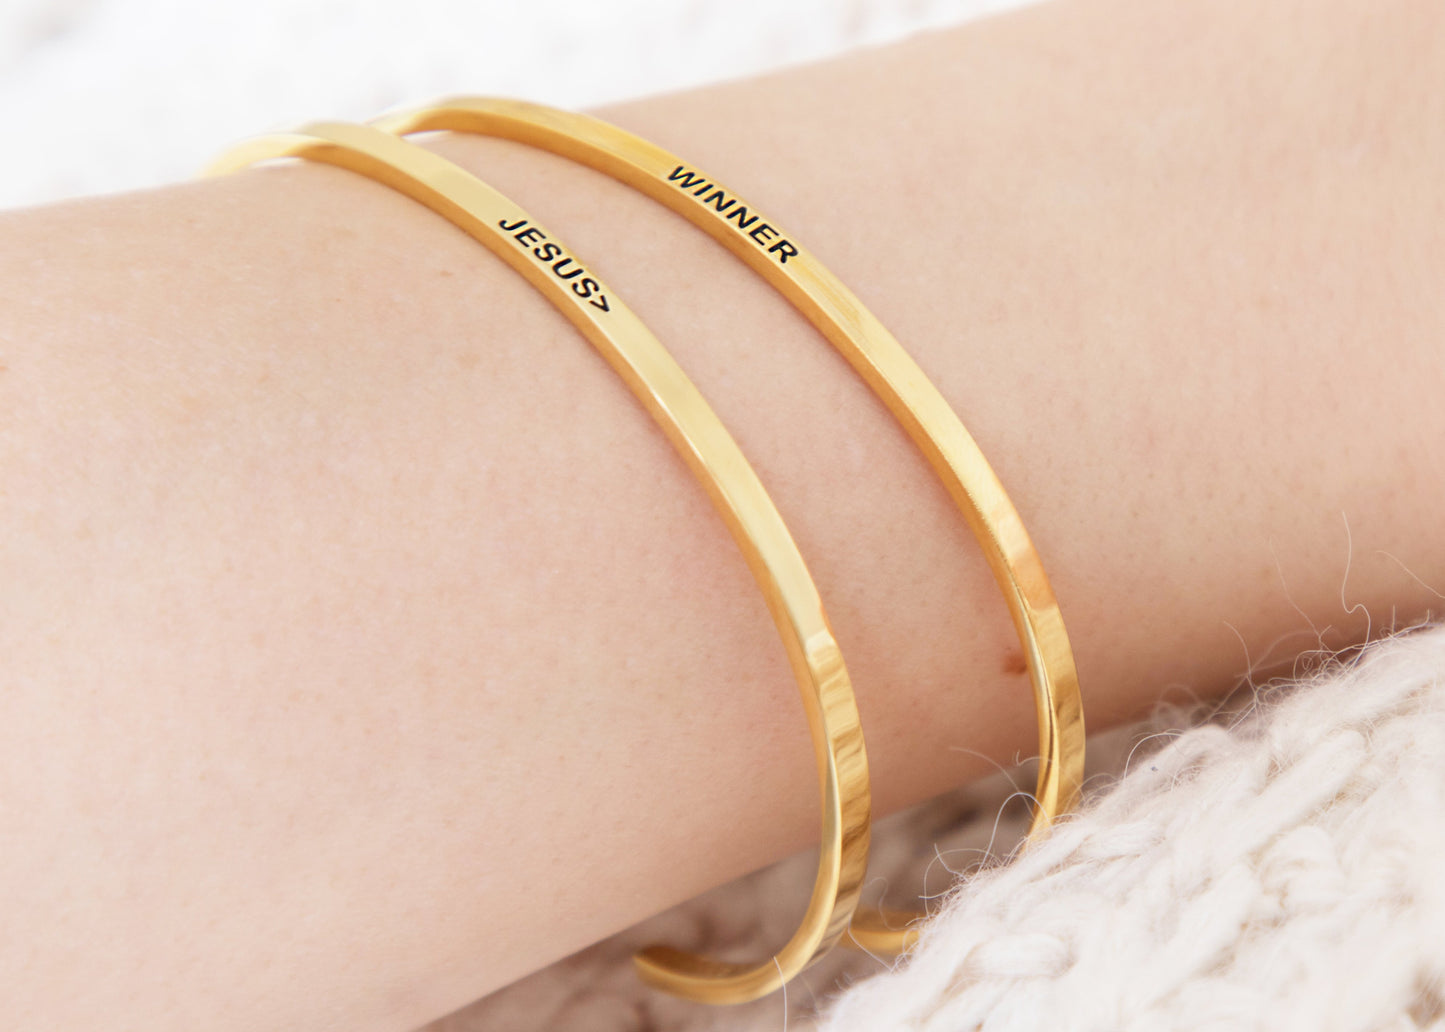 I AM ABLE - NCOURAGE Bands and Bracelets